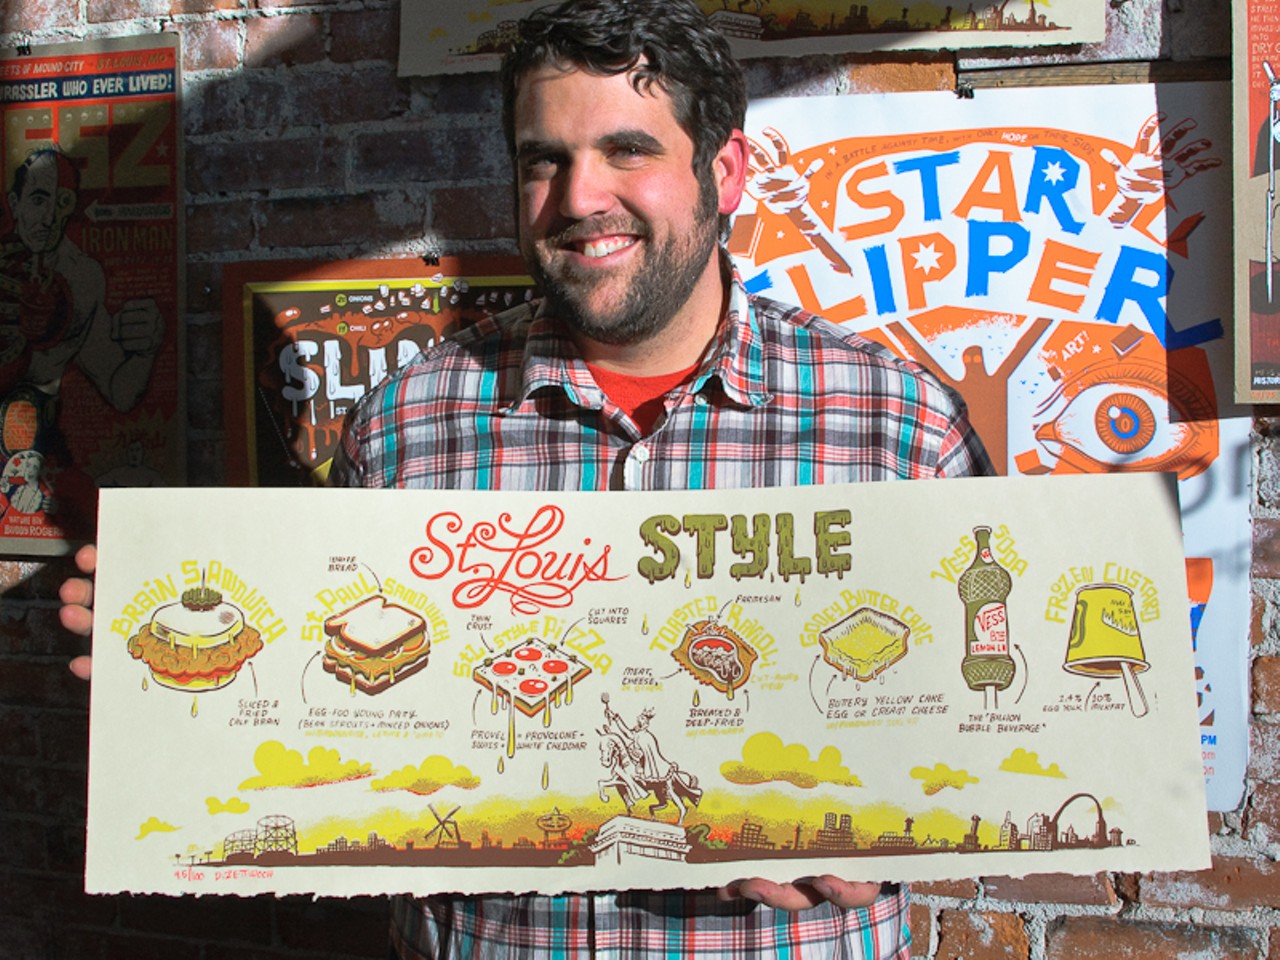 &ldquo;St. Louis Style&rdquo; indeed. Dan Zettwoch&rsquo;s local interests and stylized illustrations immortalize St. Louis&rsquo; homegrown delights: brain sandwich, St. Paul sandwich, St. Louis style pizza, toasted ravioli, gooey butter cake, Vess soda and frozen custard.